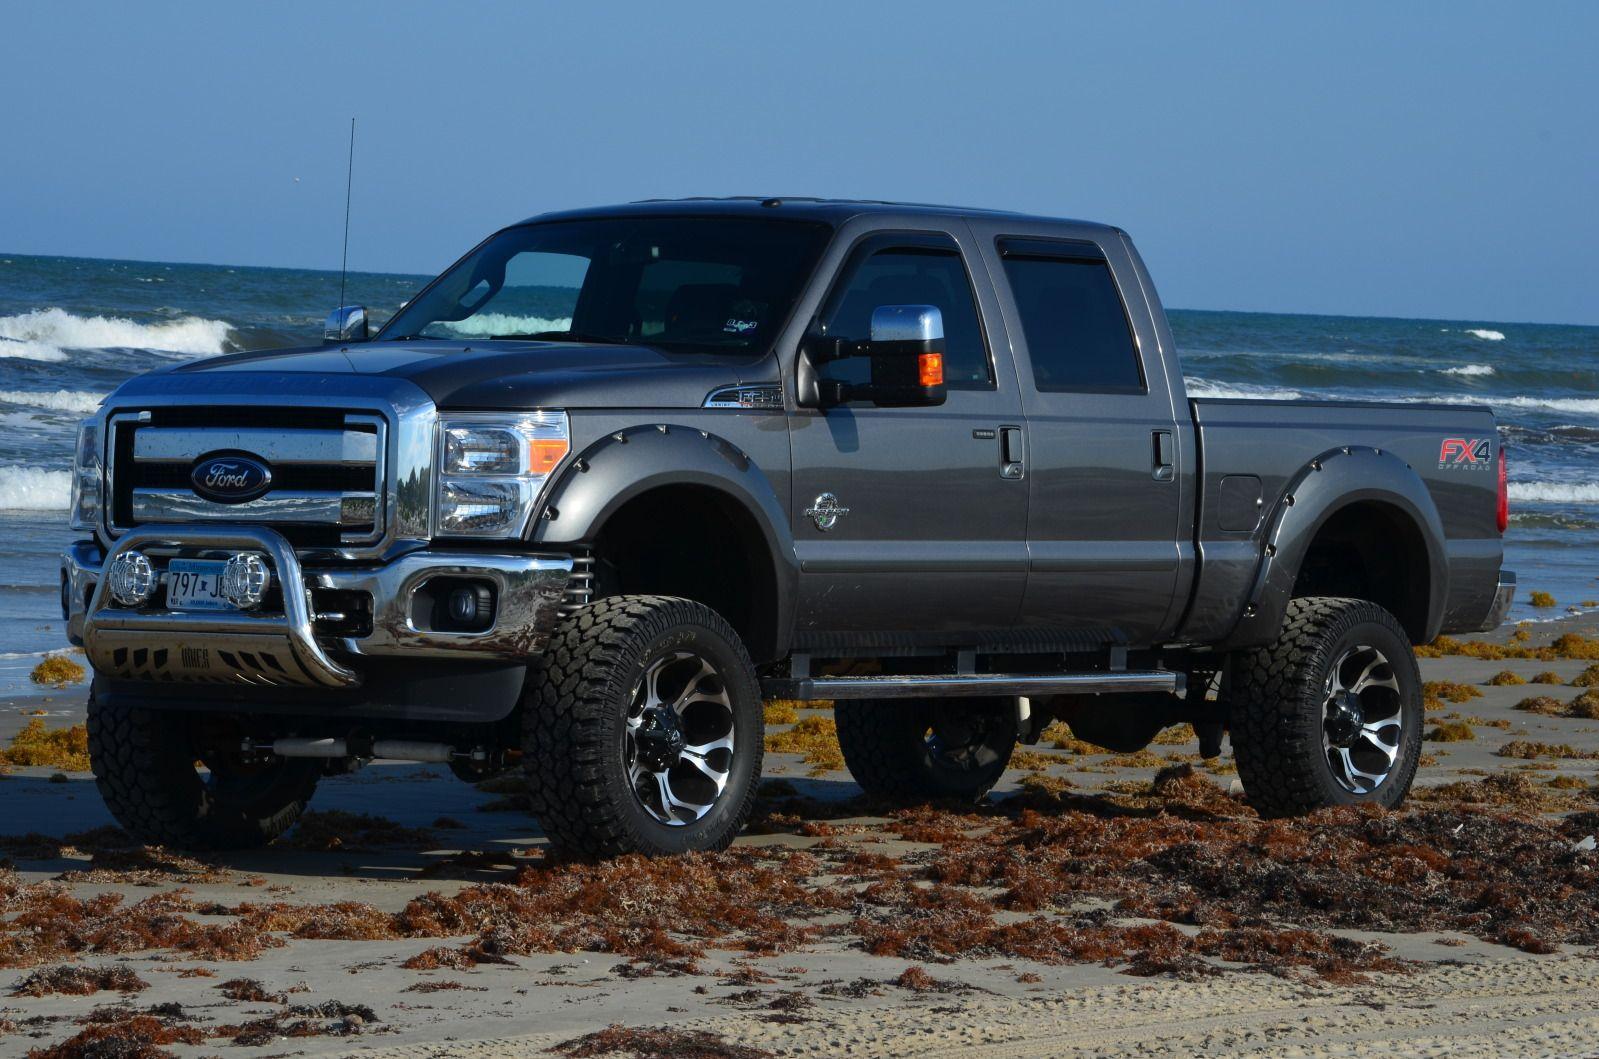 Lifted Truck Wallpaper Related Keywords & Suggestions